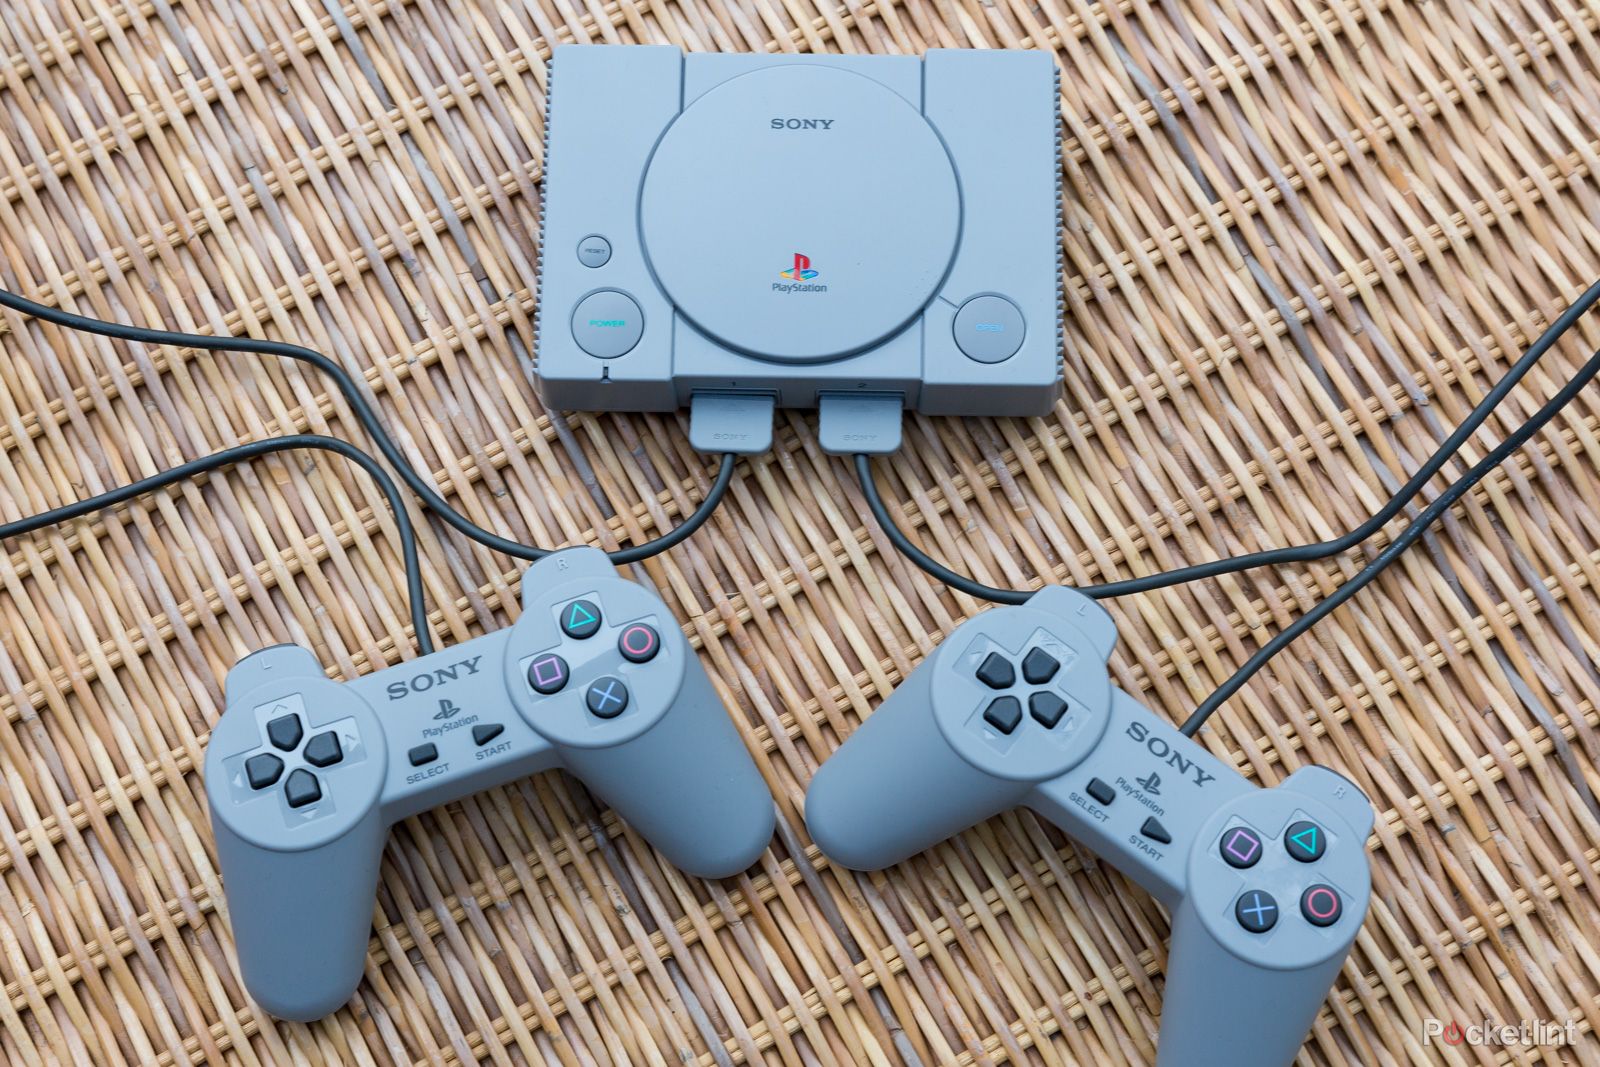 The Best Retro Games Consoles For 2020 Go Back To The Future image 5